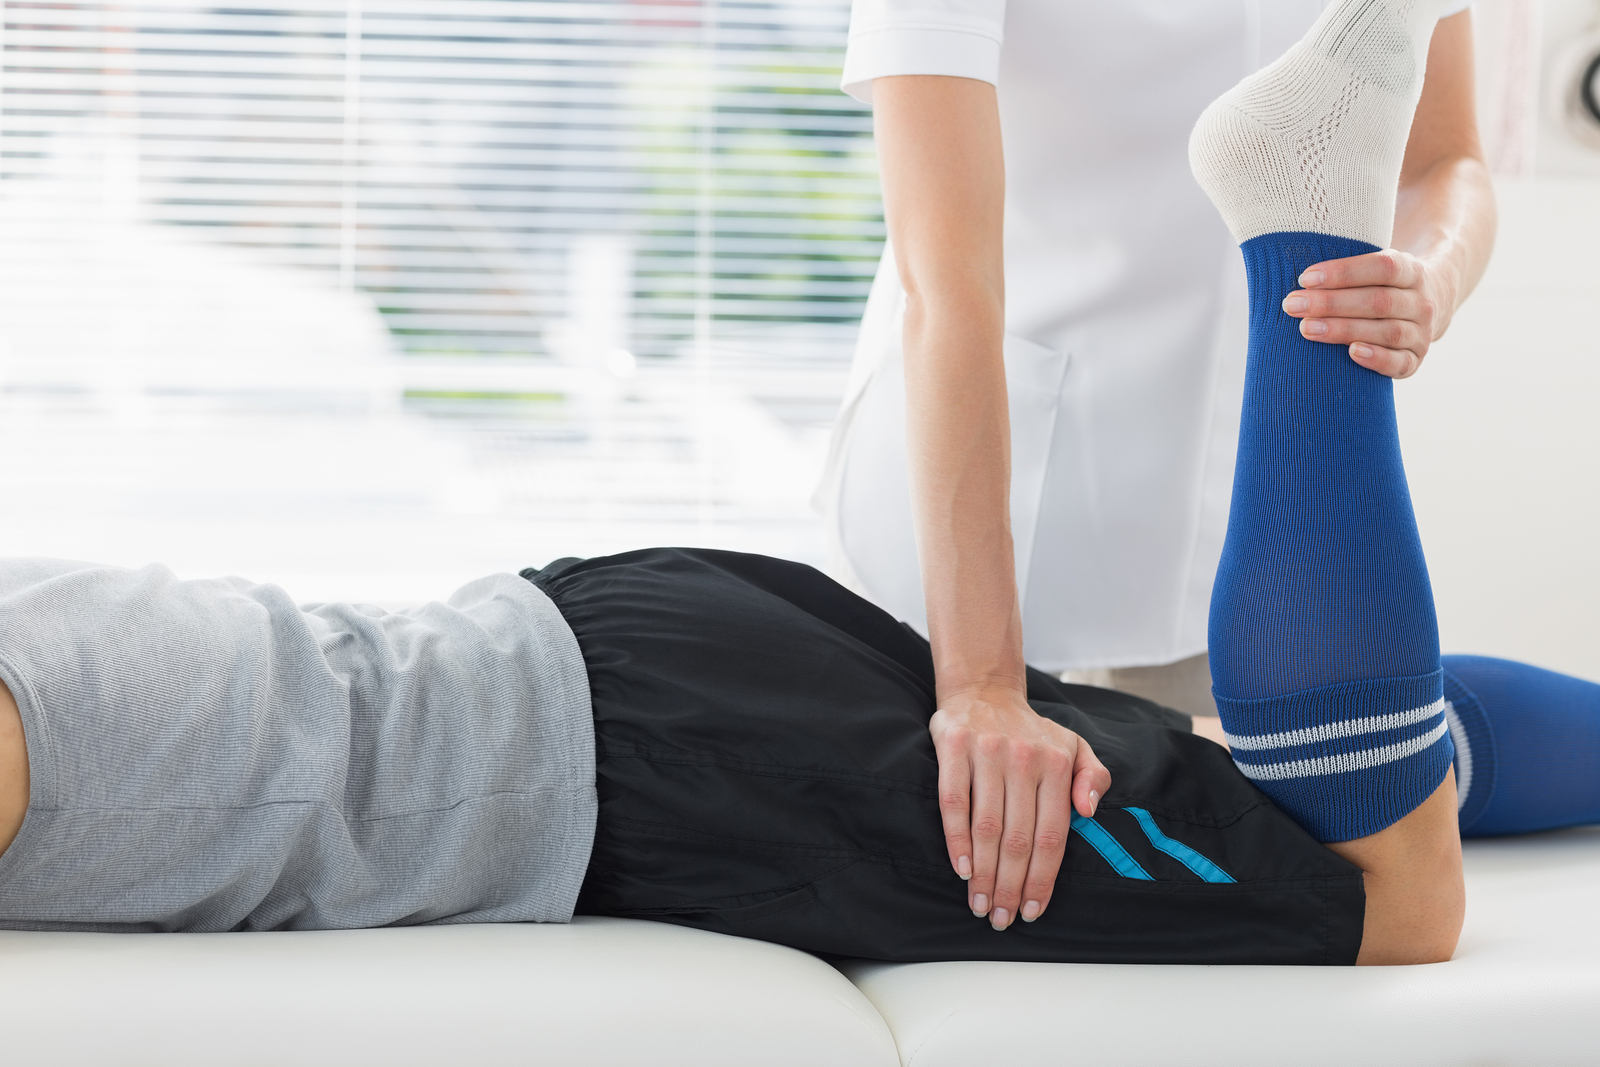 Joint Pain and Knee Pain Treatment from Our Chiropractor in Broomfield